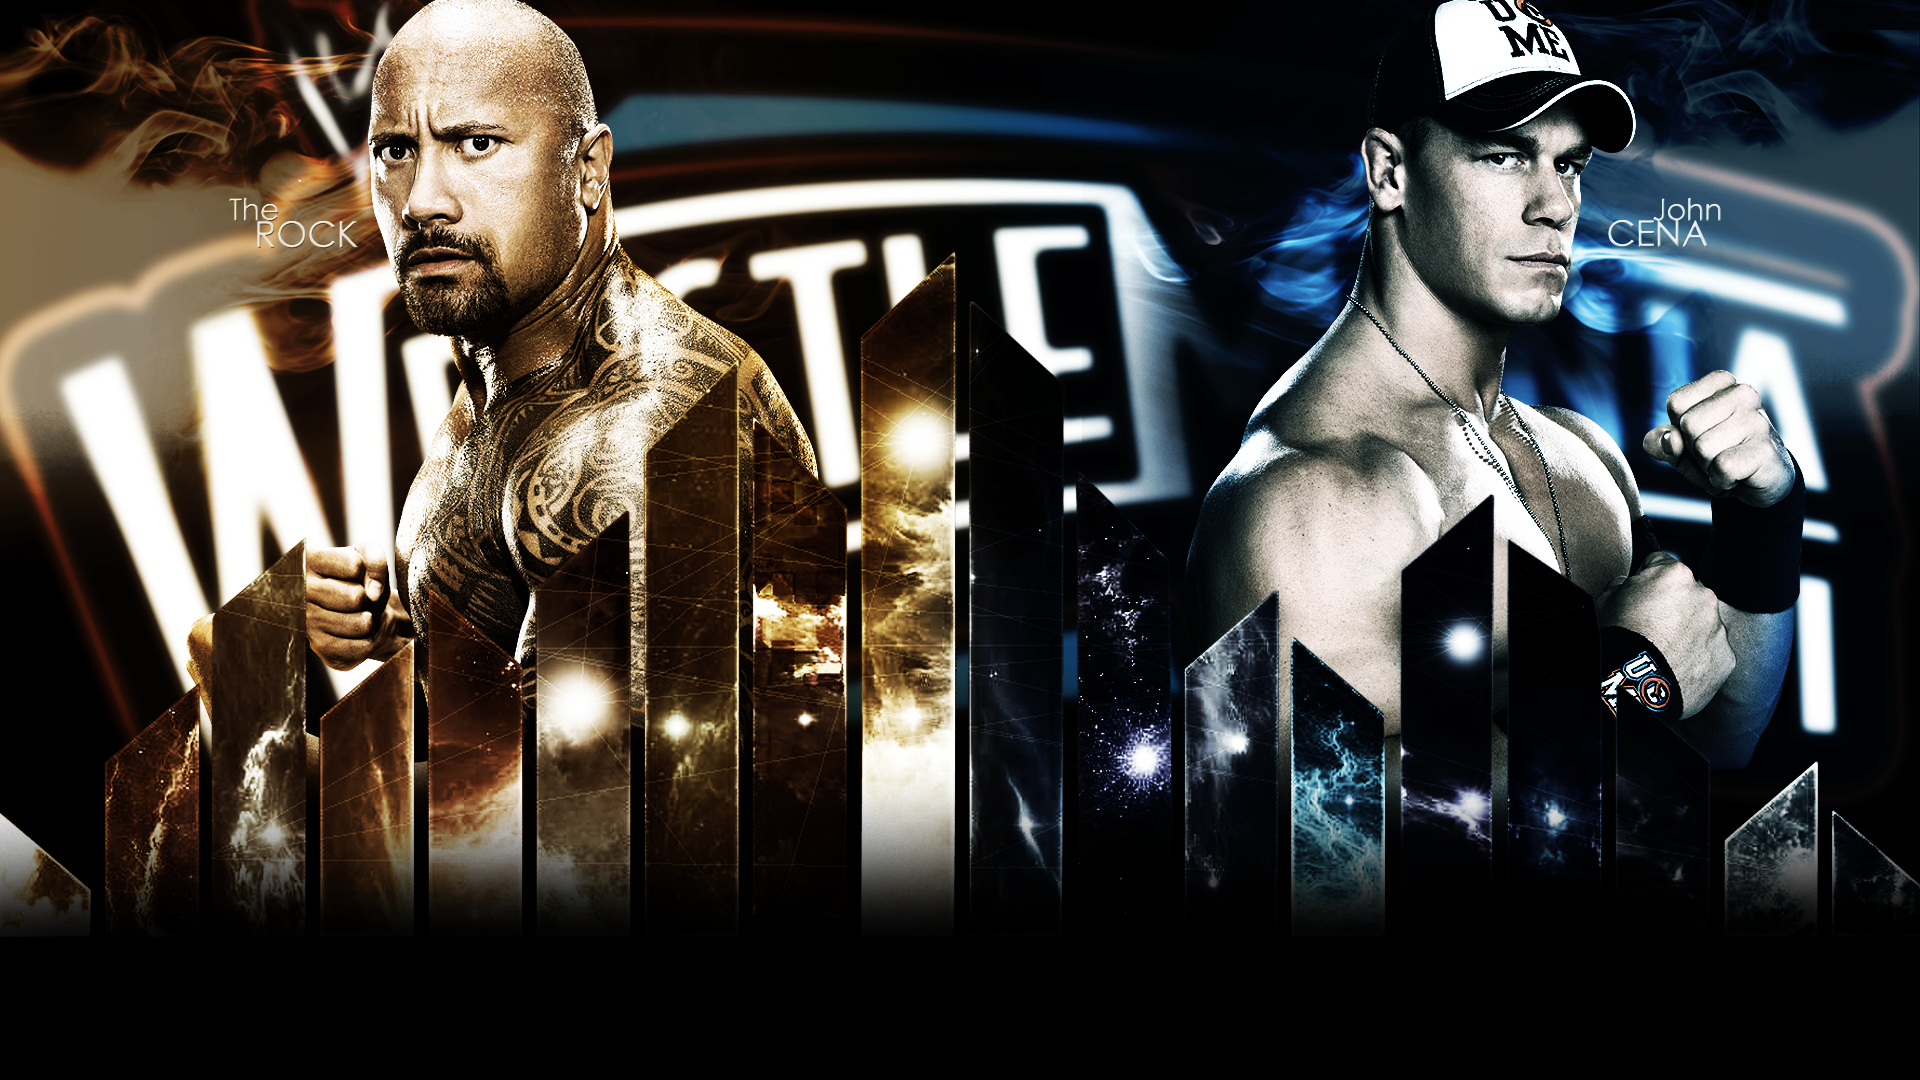 Download 1920x1080 The Rock and John Cena of HD Photo wallpaper